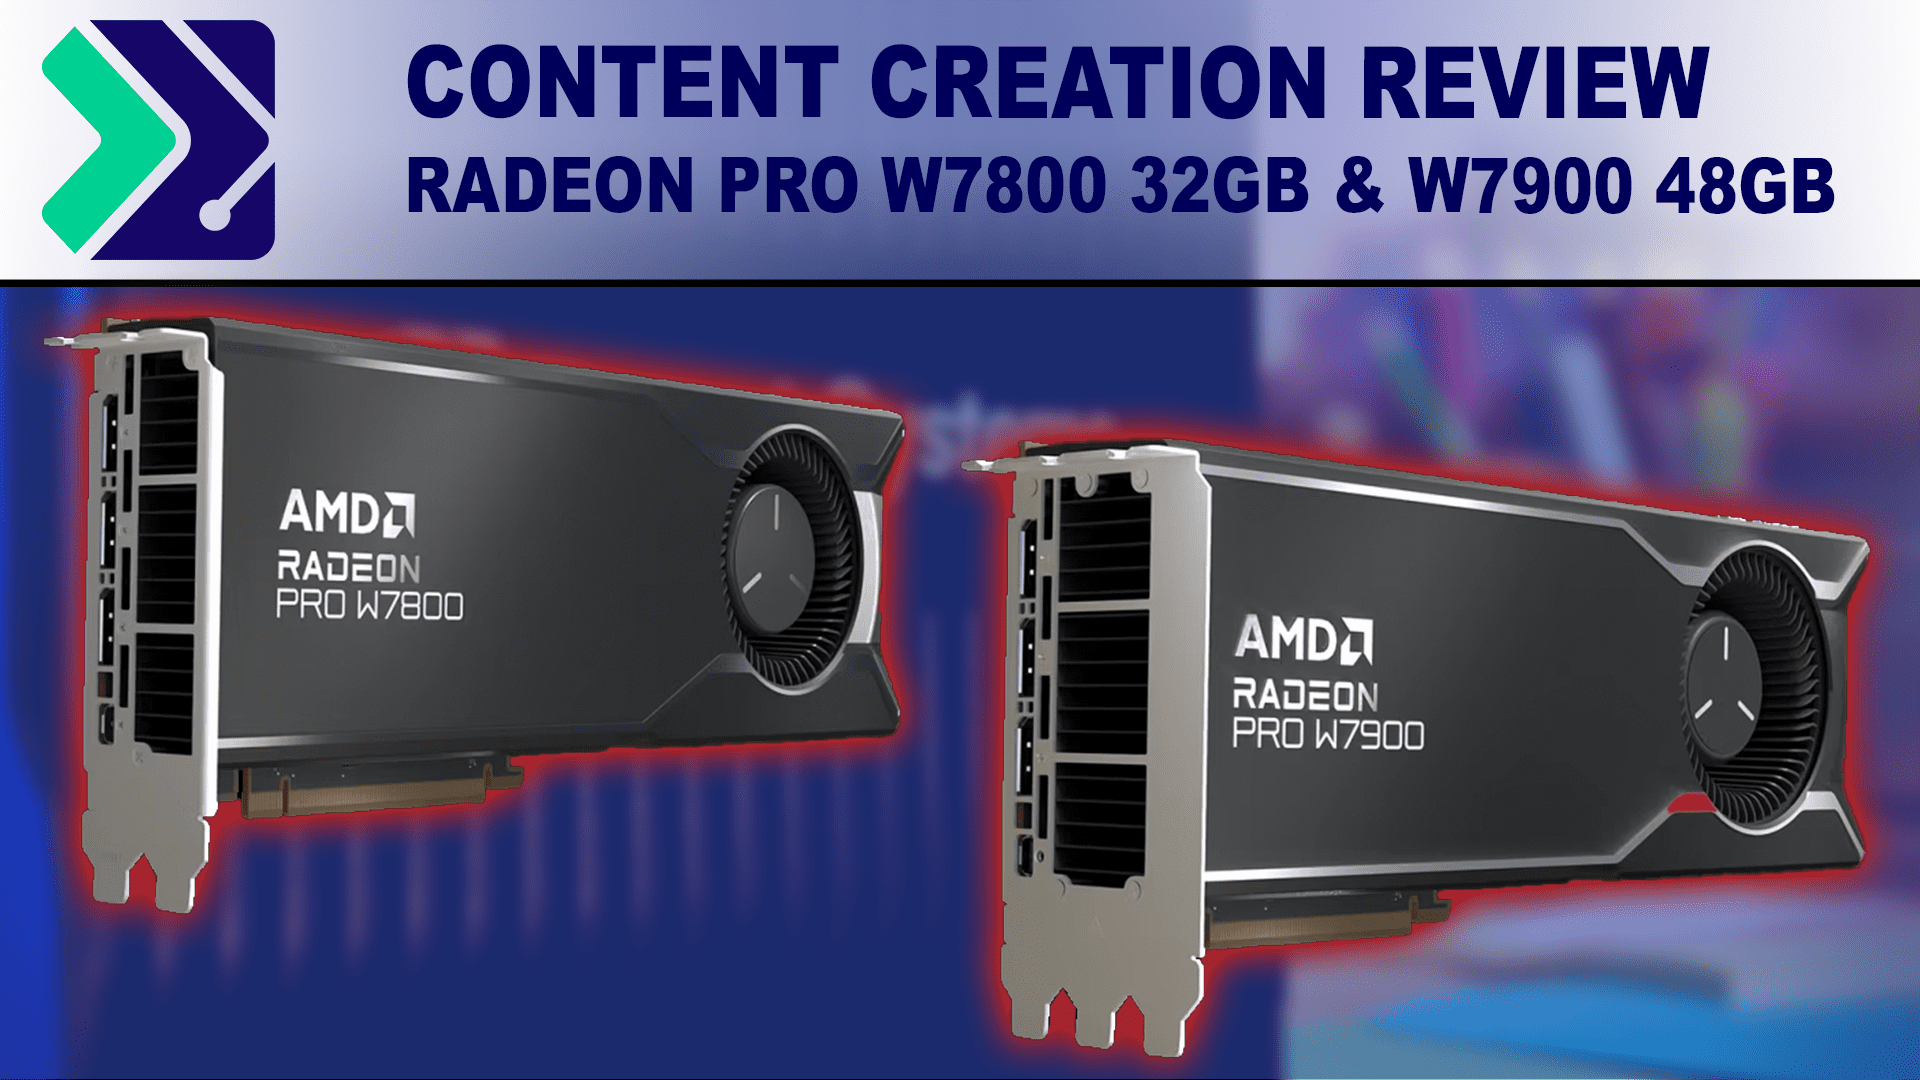 AMD Radeon PRO W7800 and W7900 Content Creation Review